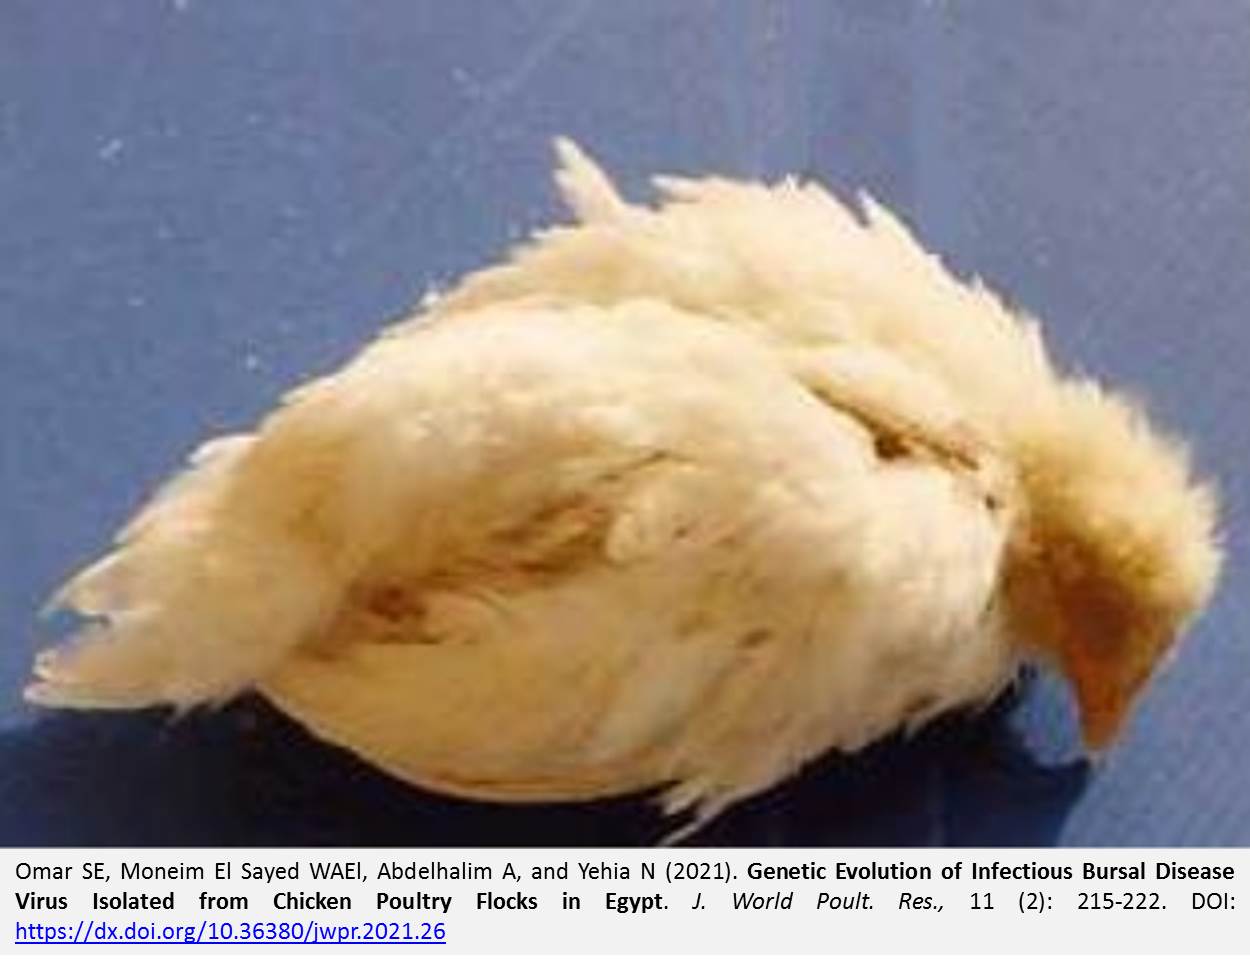 28-Genetic_Evolution_of_Infectious_Bursal_Disease_Virus_Isolated_from_Chicken